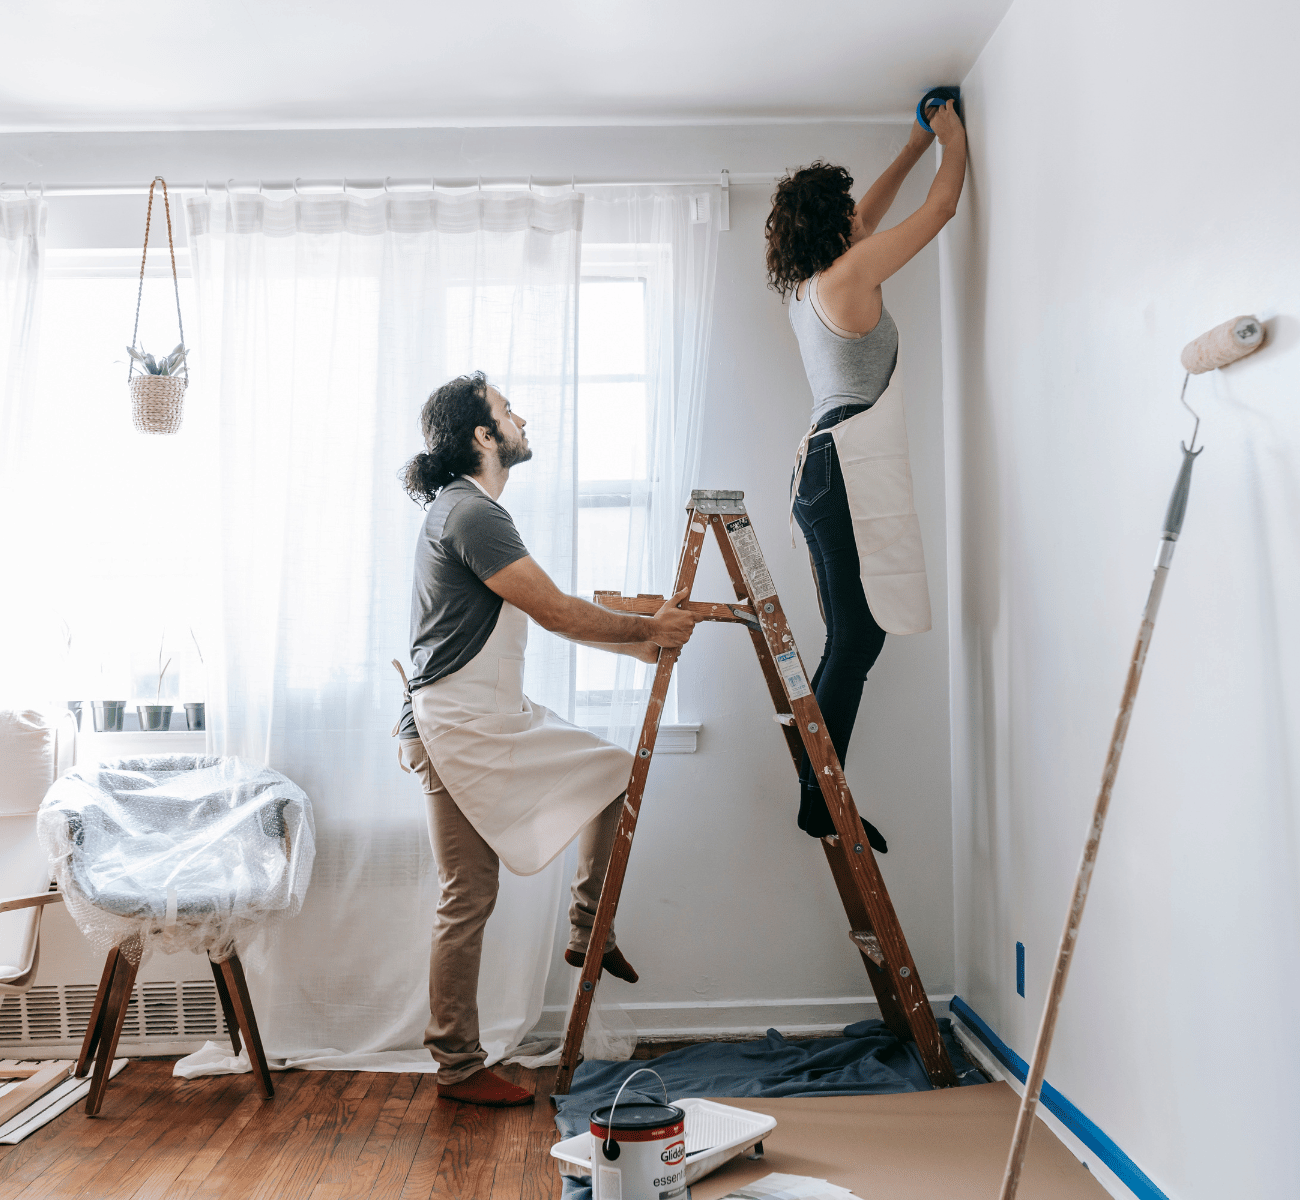 7 Home Renovation Mistakes First-Time Homebuyers Make